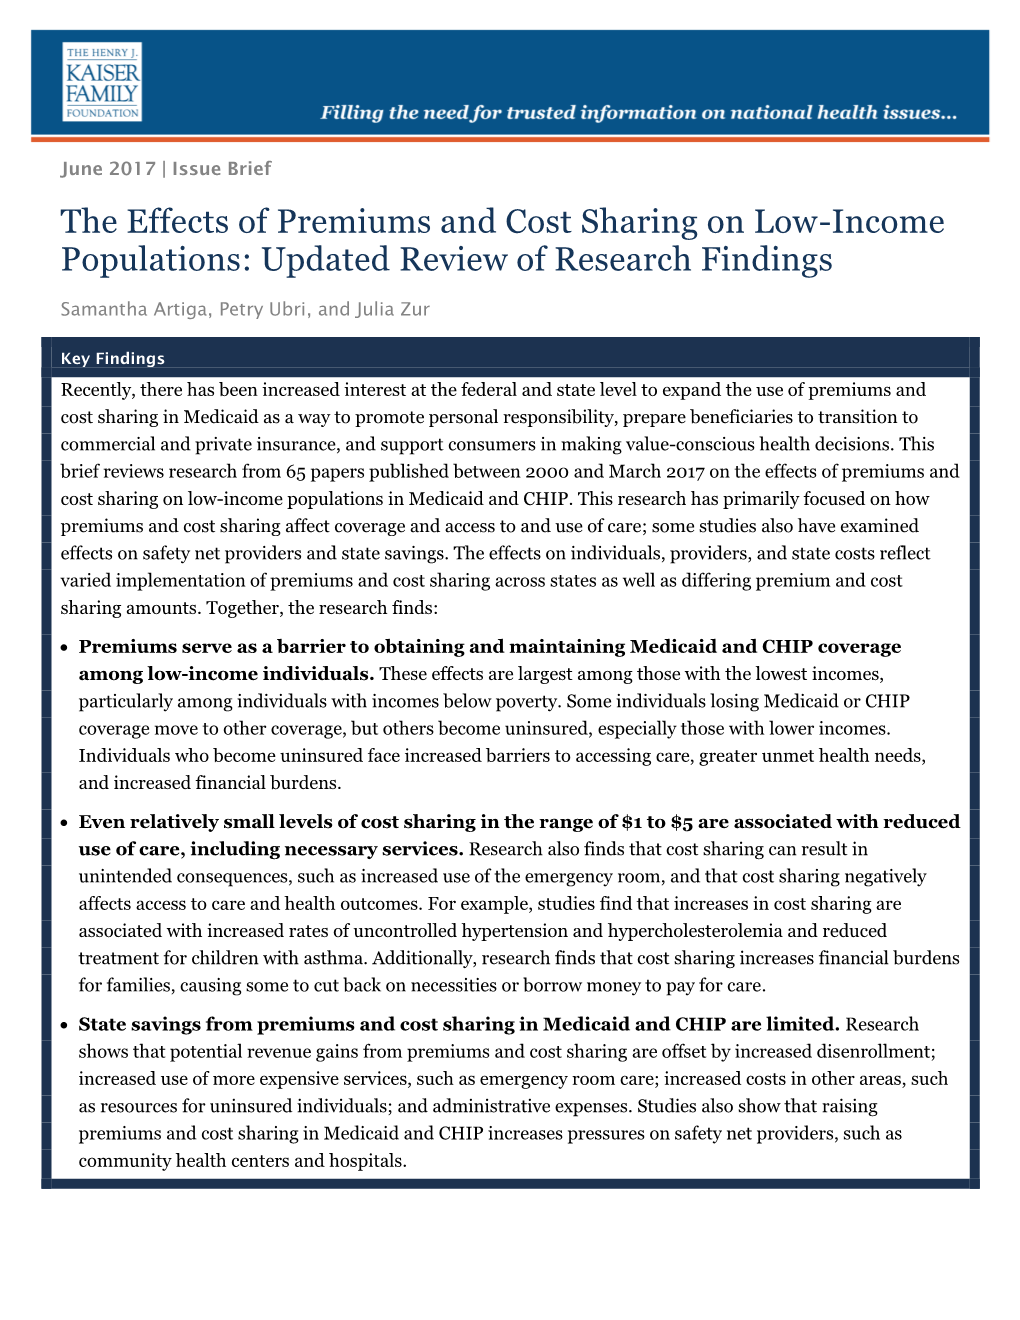 The Effects of Premiums and Cost Sharing on Low-Income Populations: Updated Review of Research Findings